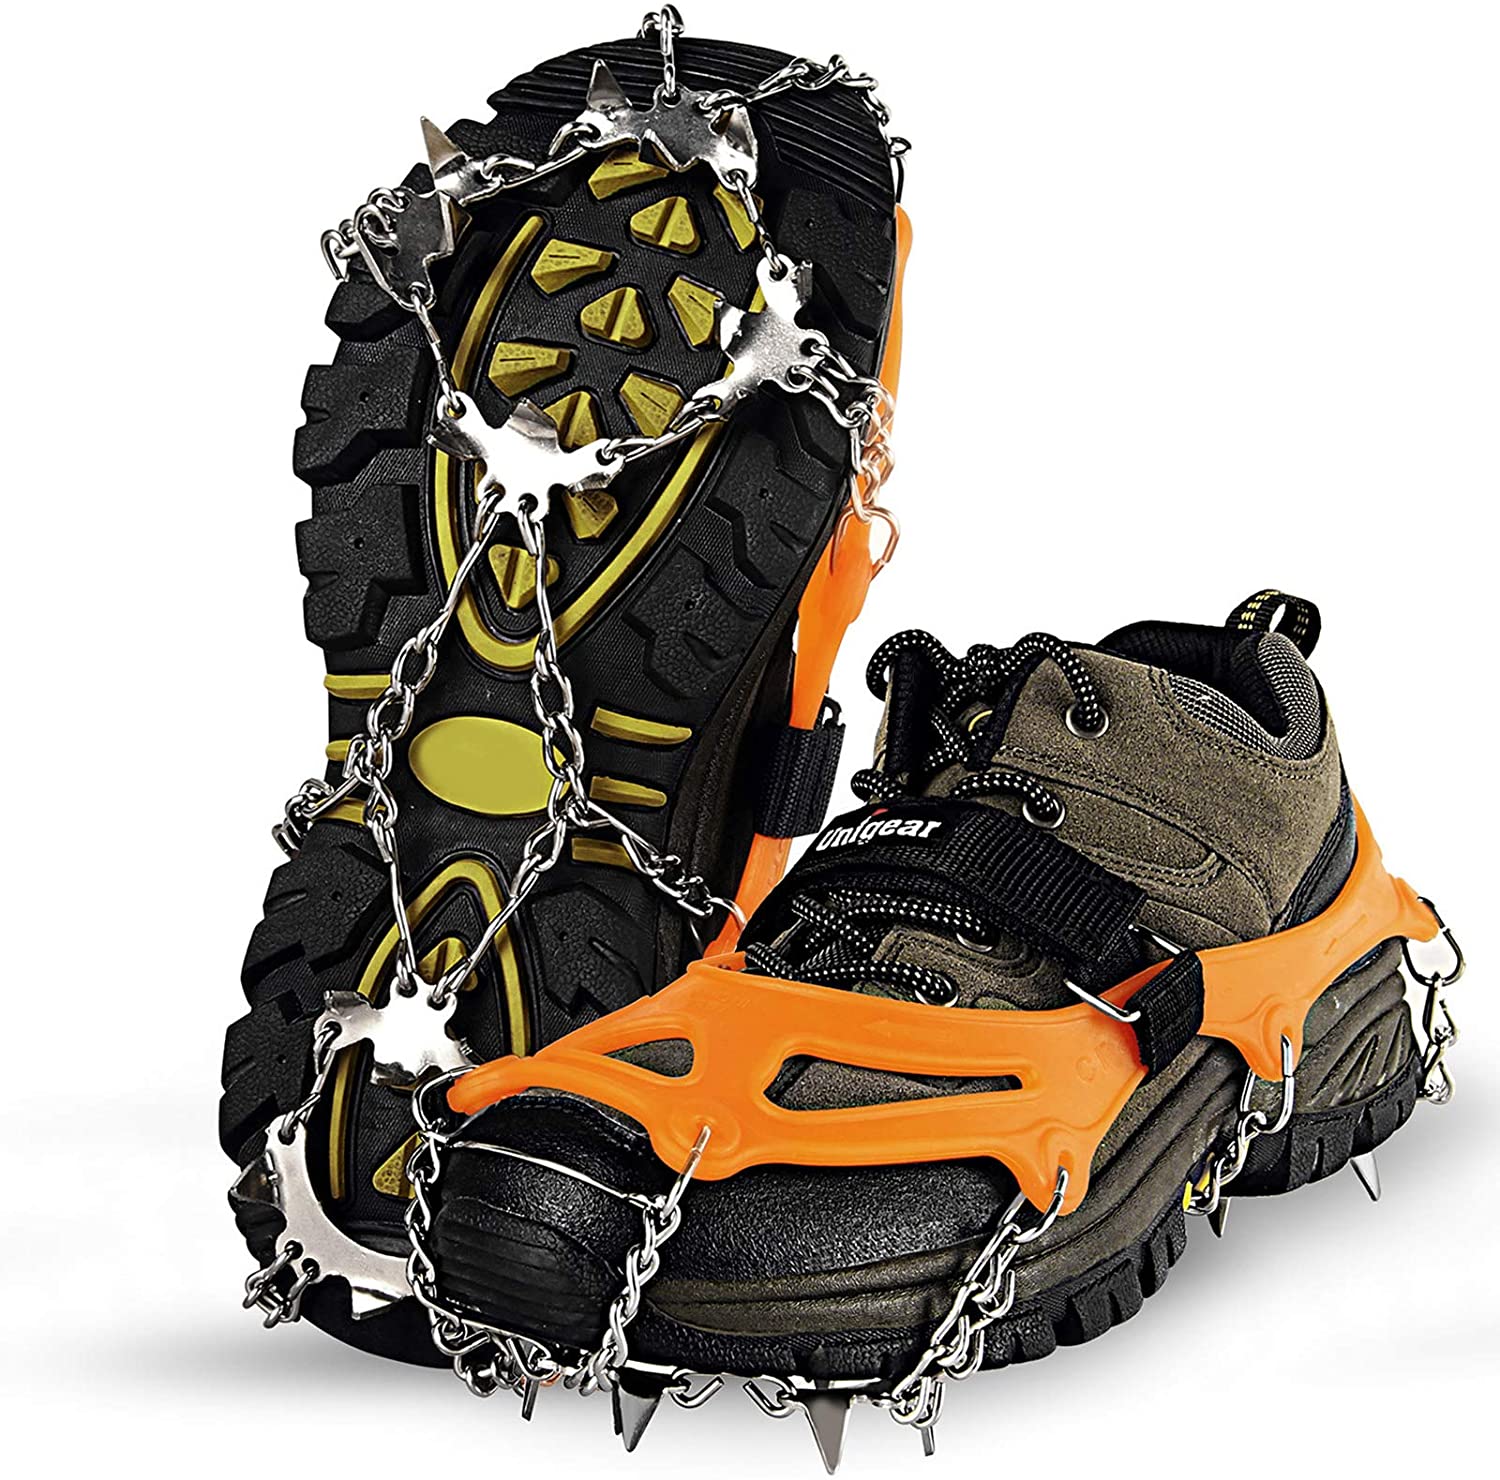 Crampon Micro Spikes Ice Snow Grips Traction Cleats System Safe Climbing Walking 